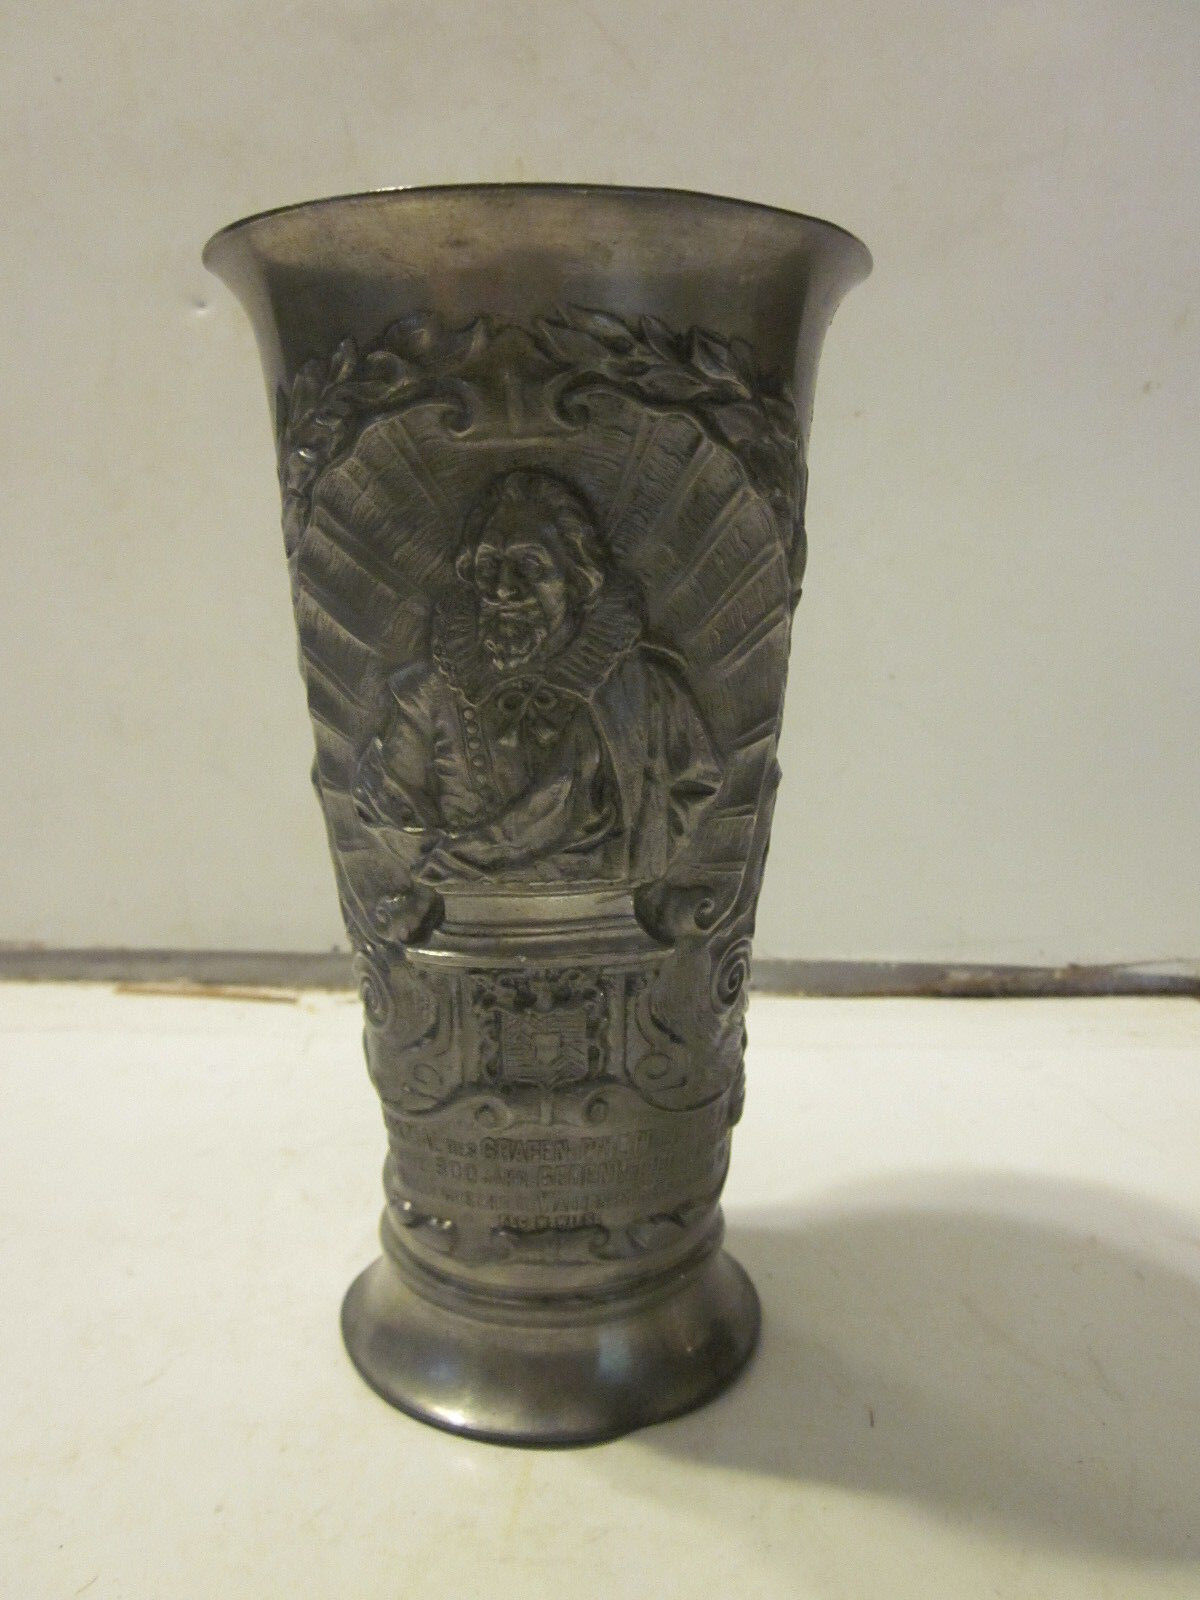 ANTIQUE 1897 COMMEMORATIVE PEWTER TALL CUP GENERAL GRAFEN PHILIPP LUDWIG II